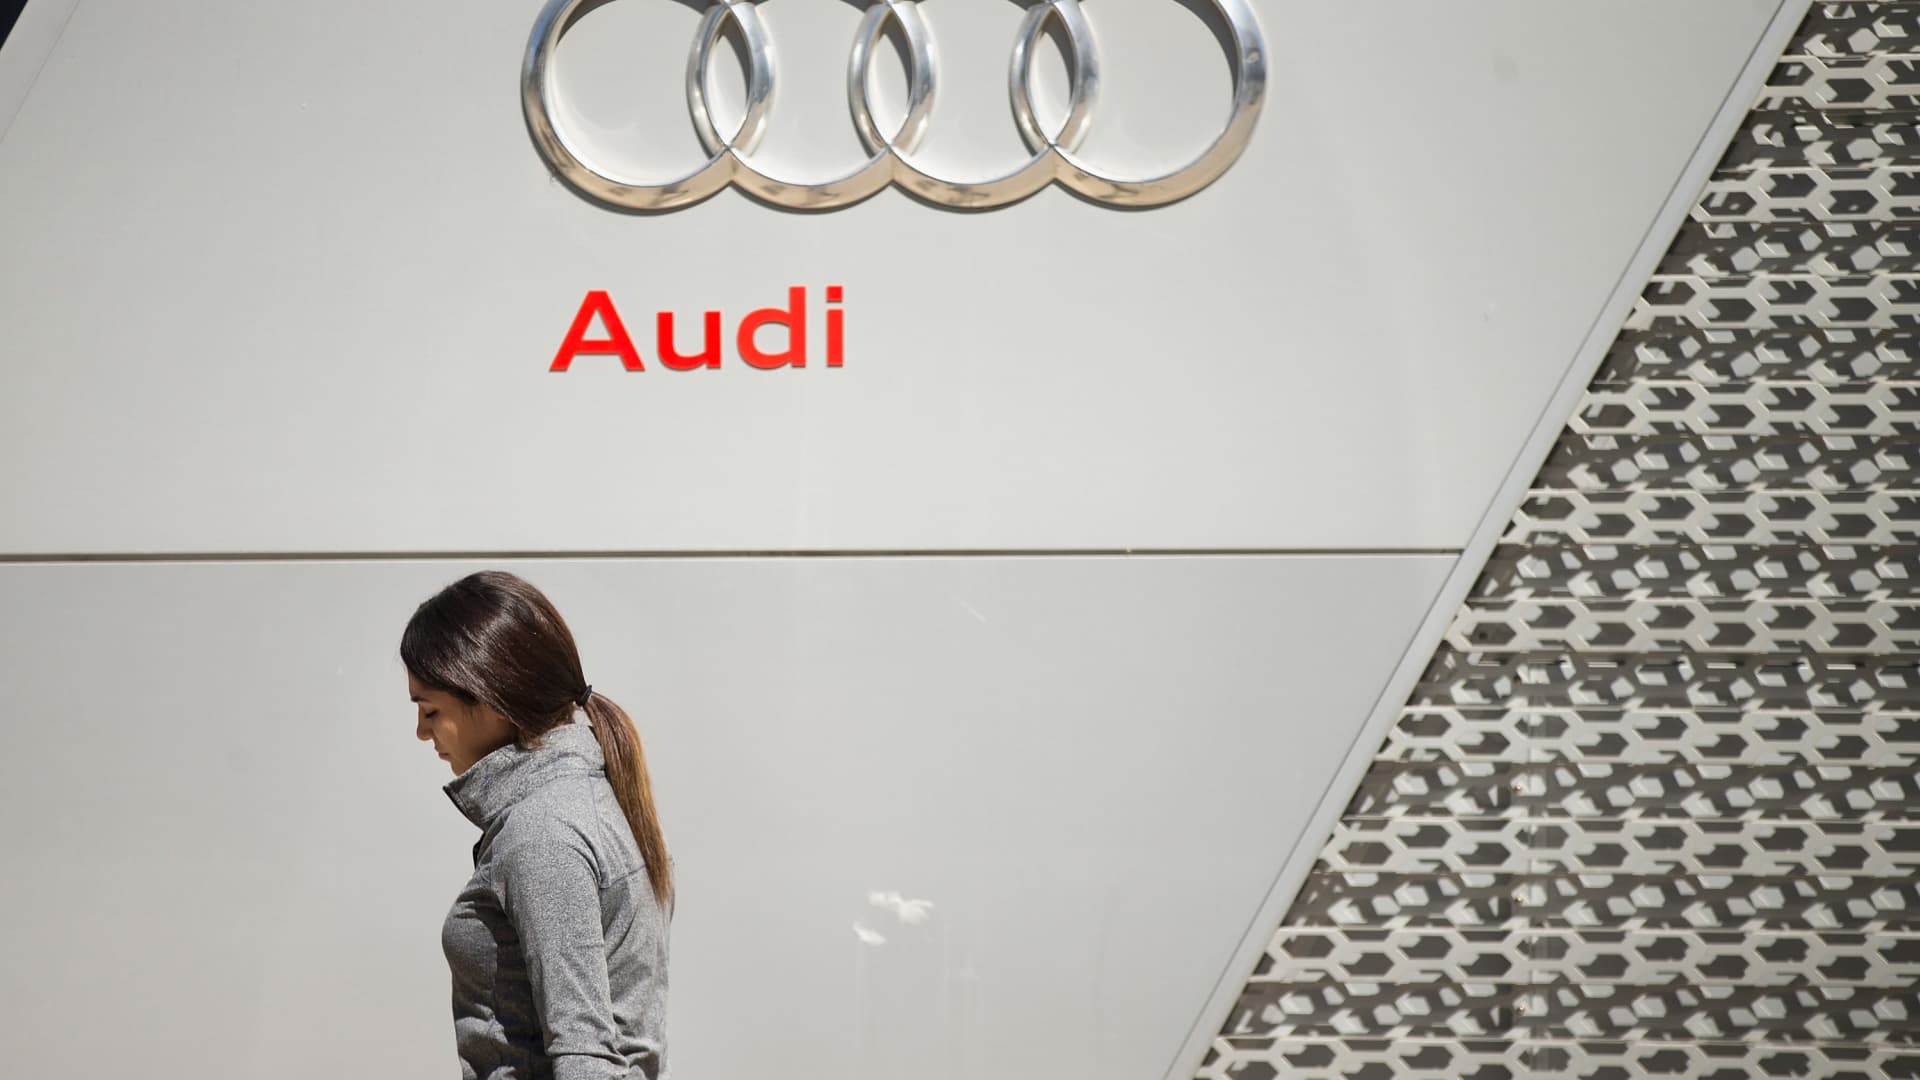 Audi expects war in Ukraine to cause ‘tremendous interference’